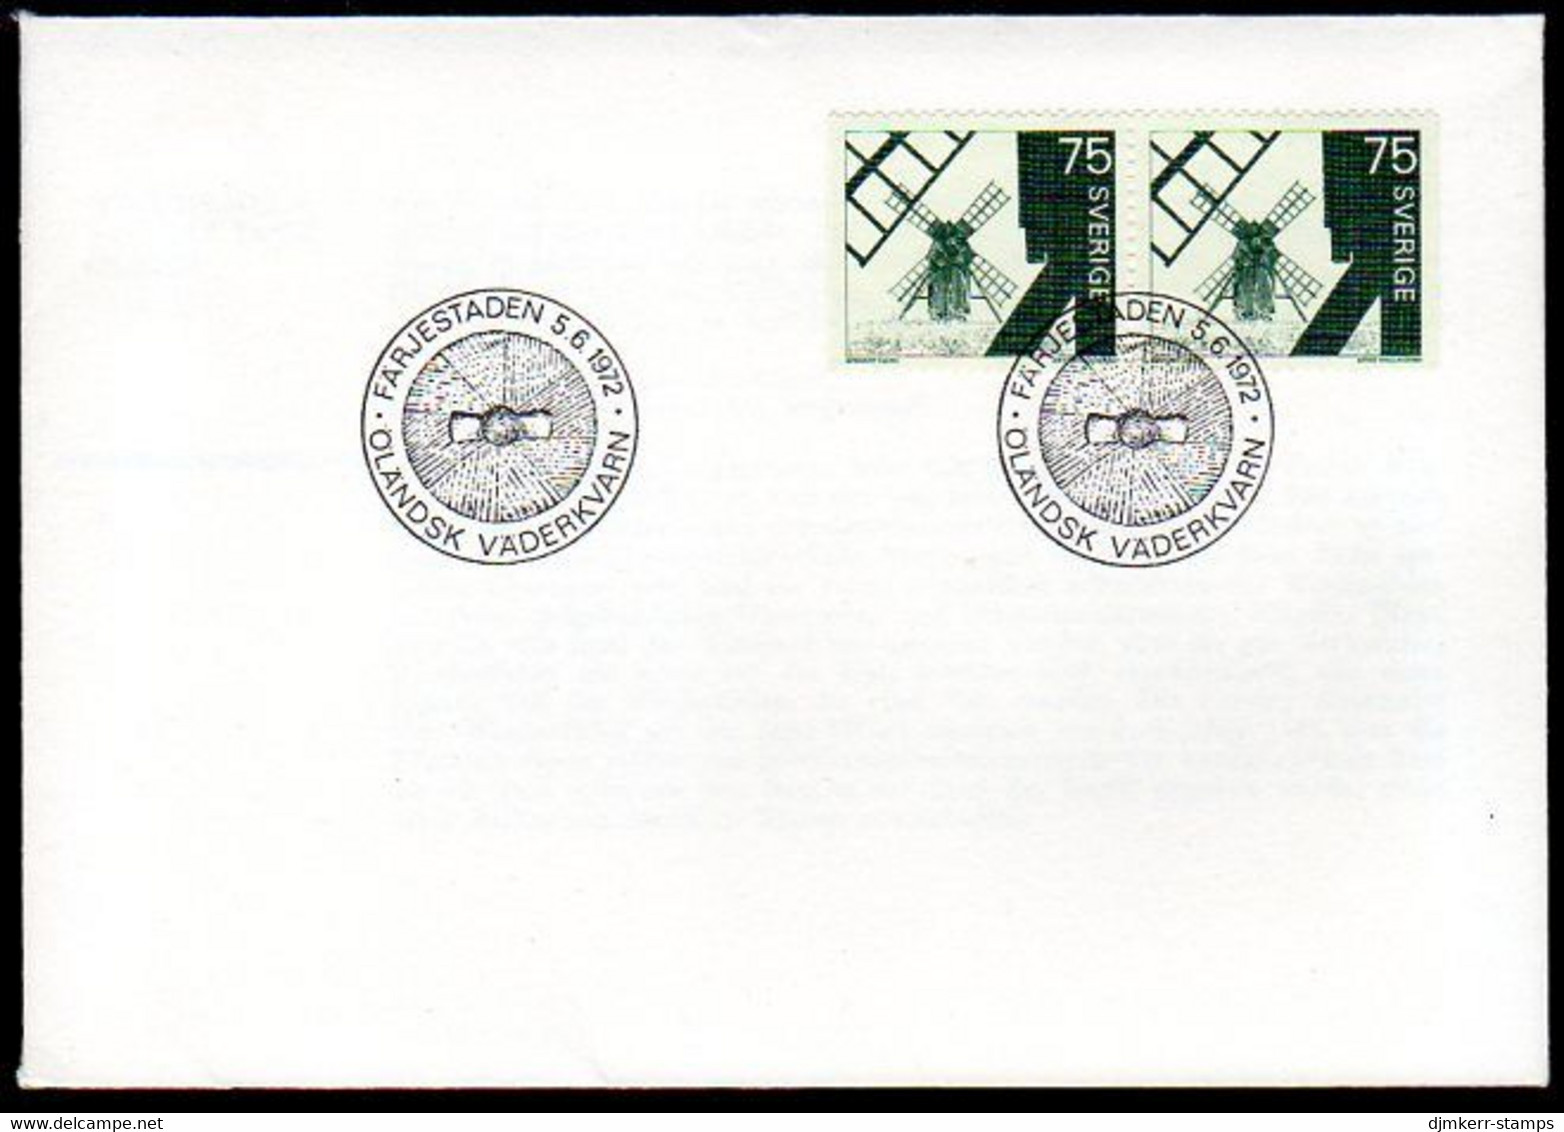 SWEDEN 1971  Definitive: Wood Sledge And Windmill FDCs (2).  Michel 710-11 - FDC